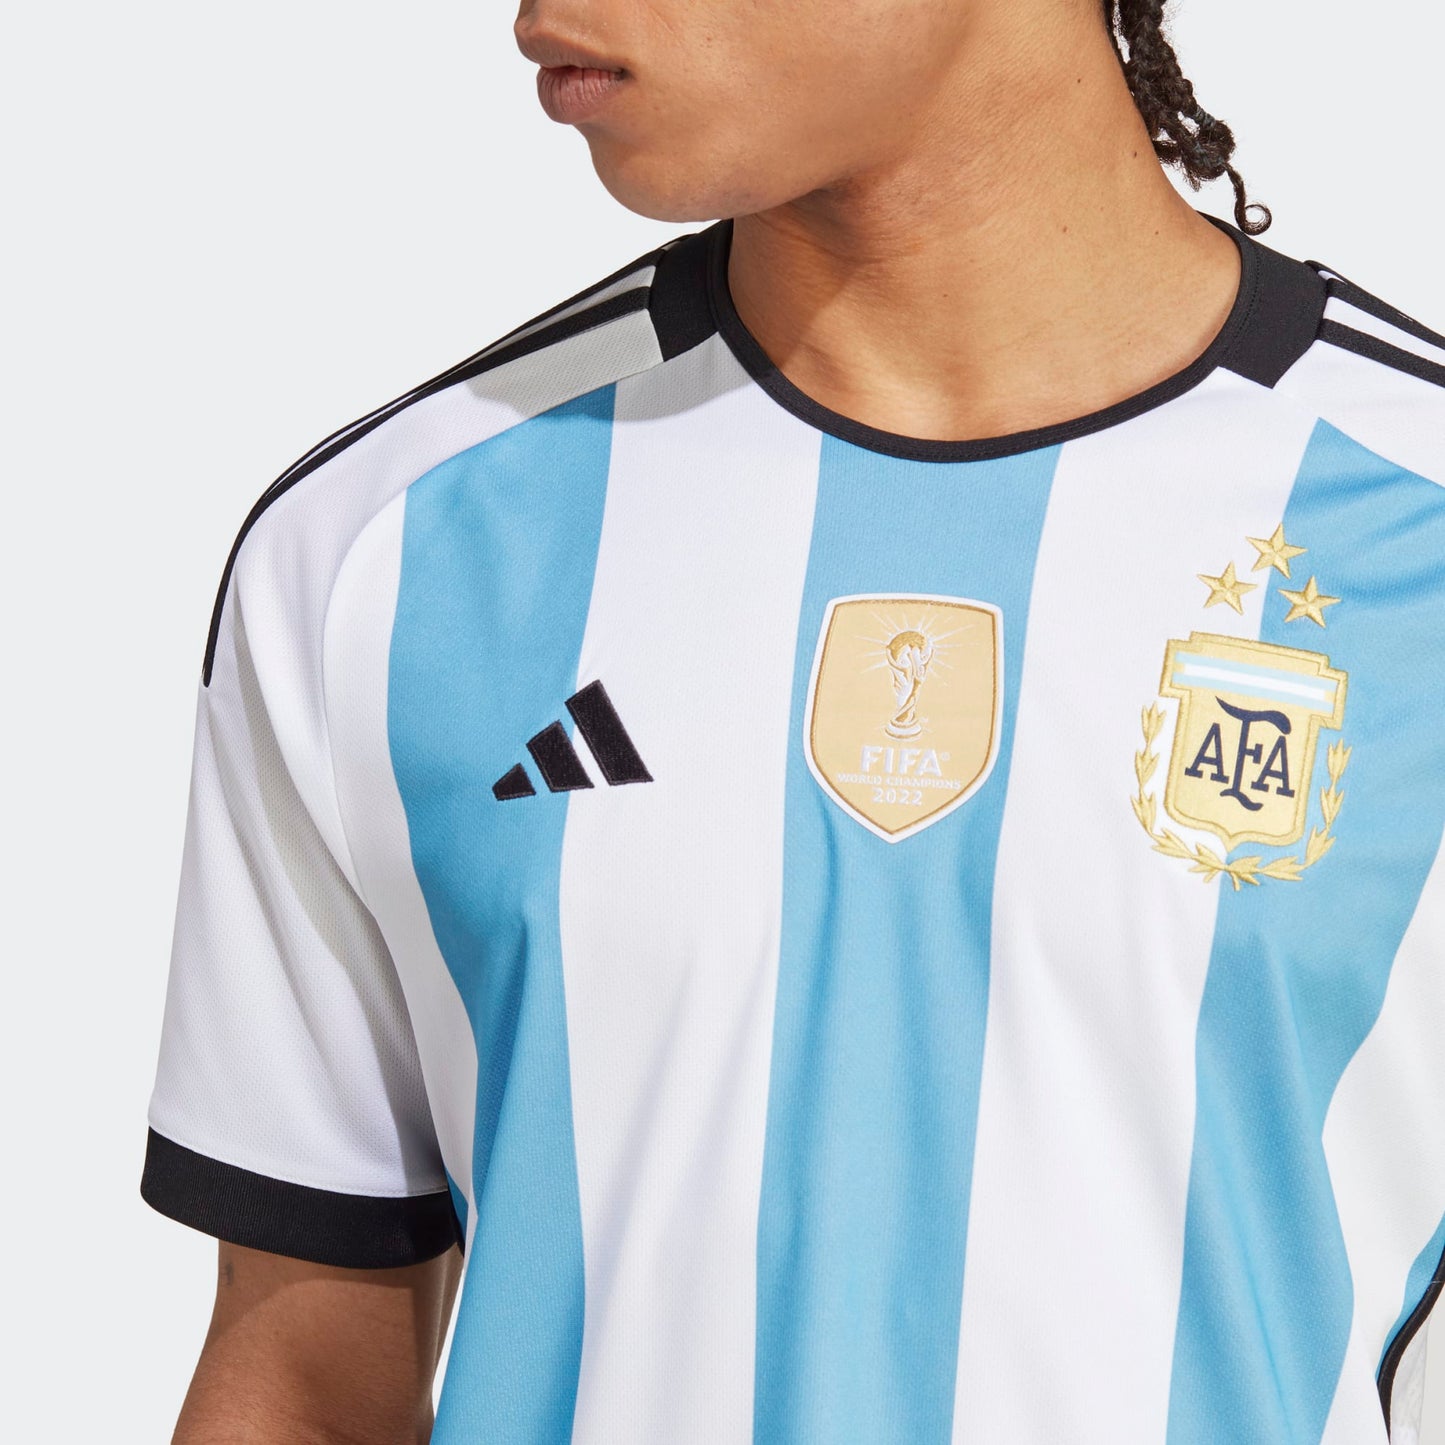 adidas Argentina 22 Home Jersey - White, Men's Soccer